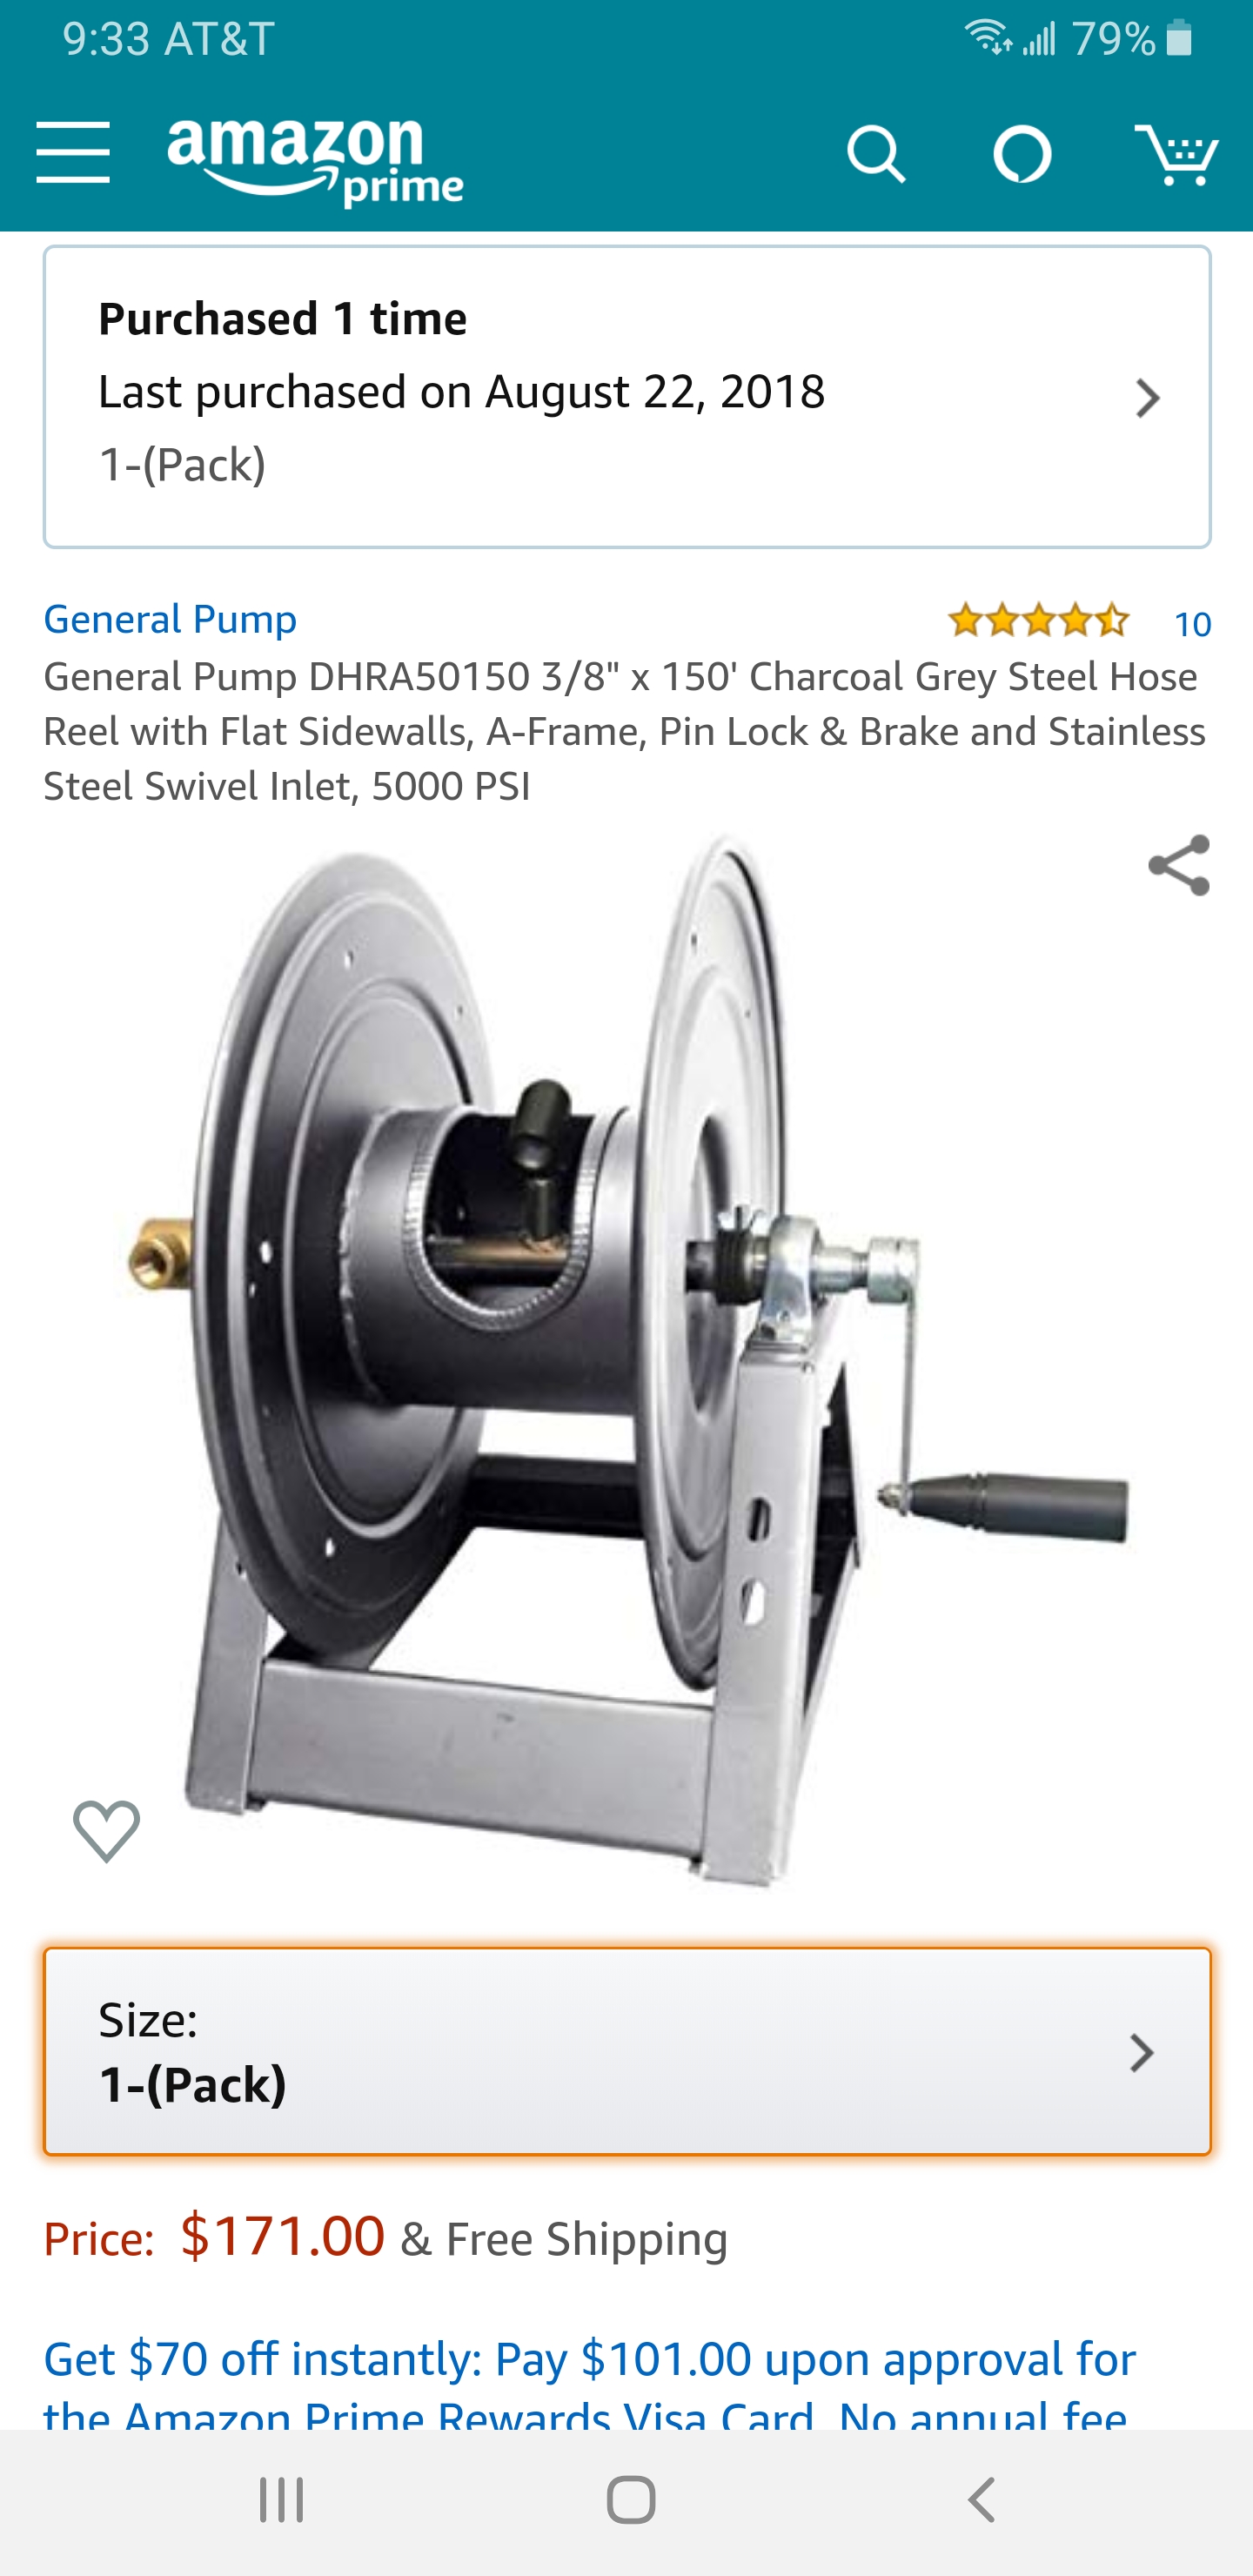 New hose reel or this used chem one - Supplies & Equipment